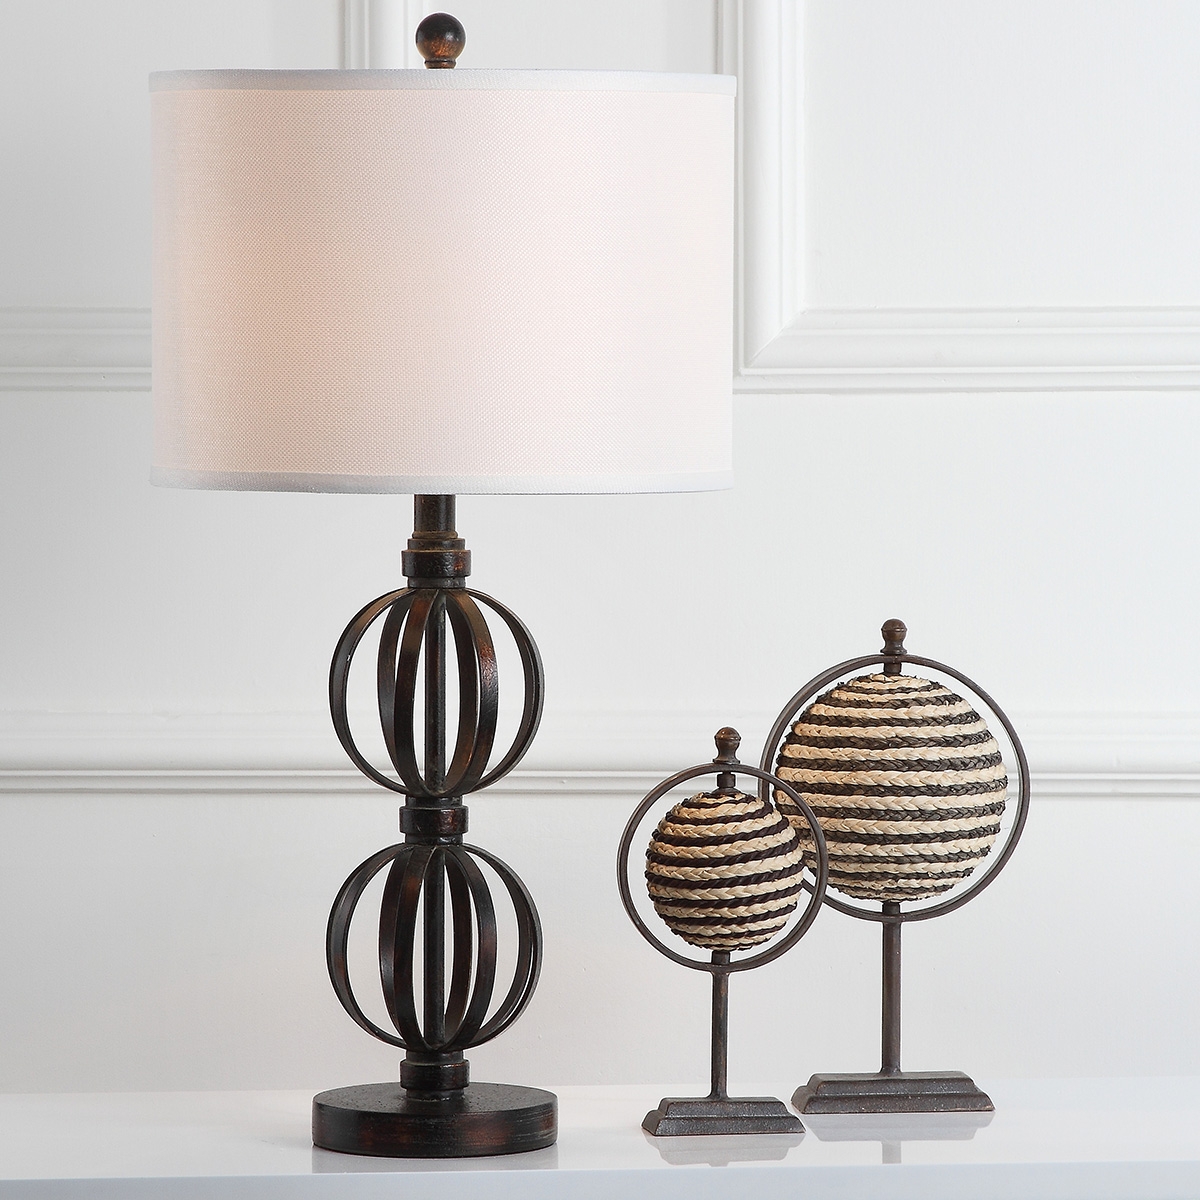 Calista 27.75-Inch H Double Sphere Table Lamp - Oil-Rubbed Bronze - Arlo Home - Image 5